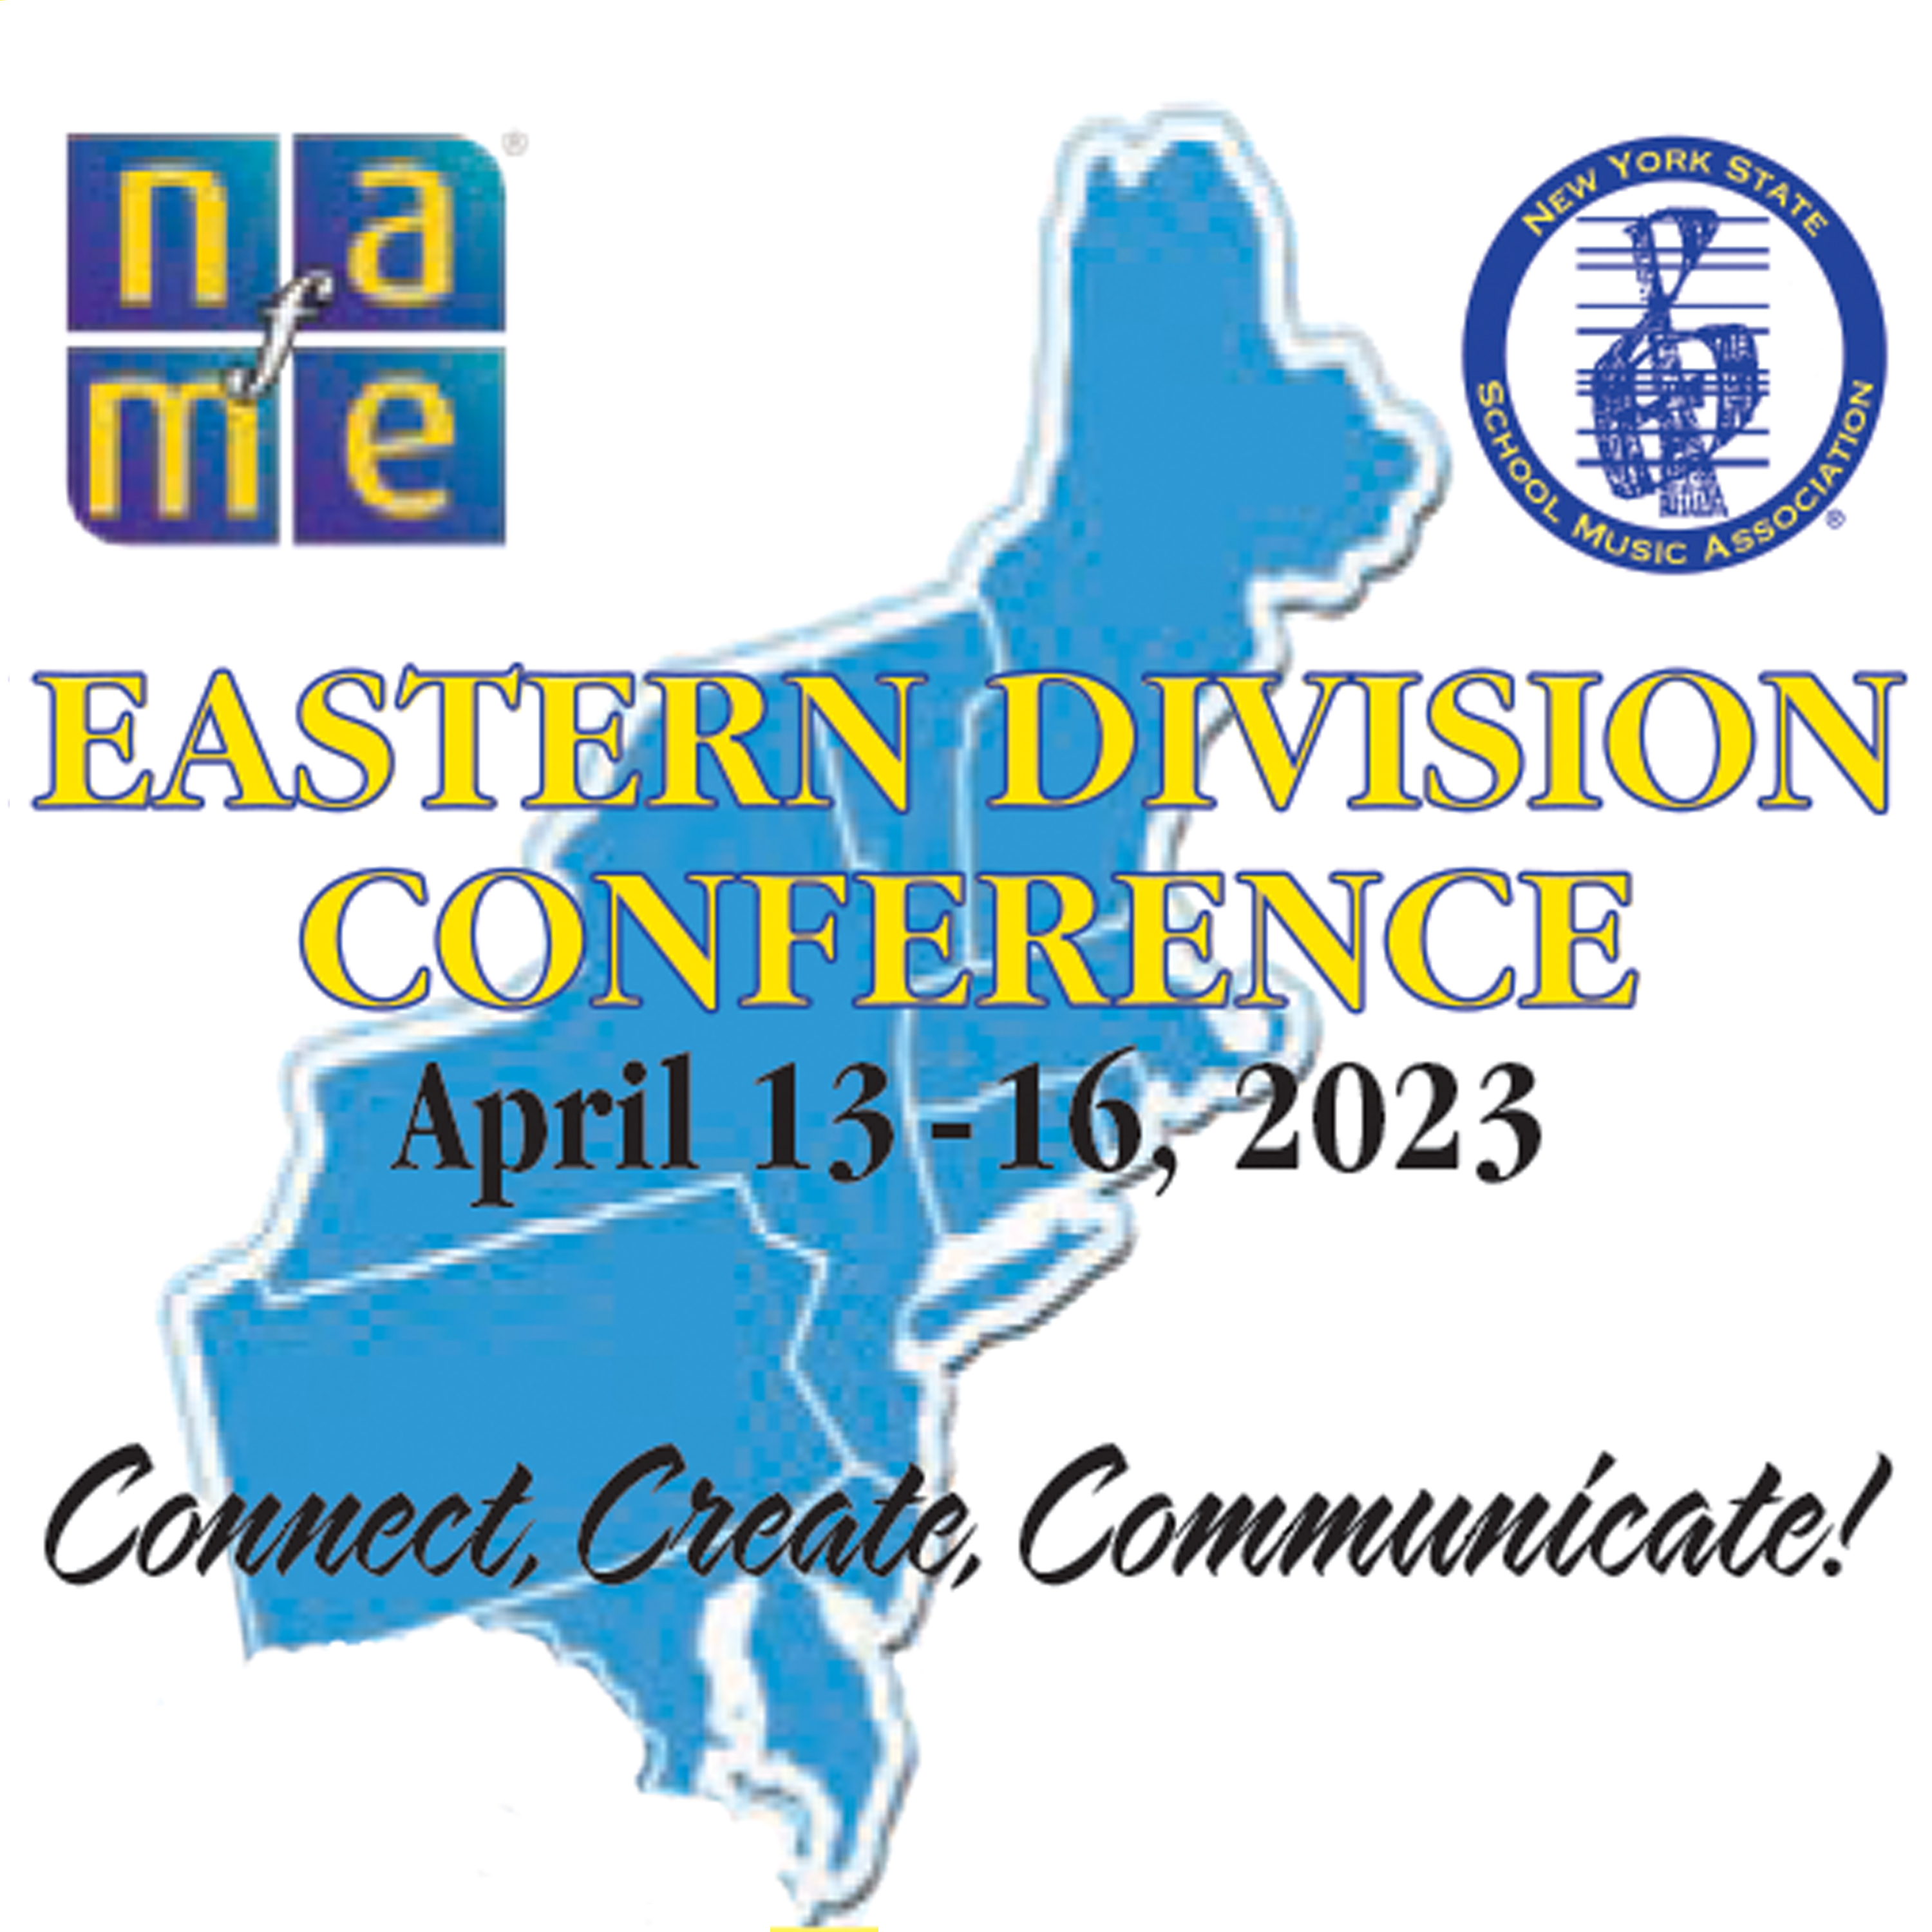 NAfME Eastern Division Conference 2023 Alfred Music